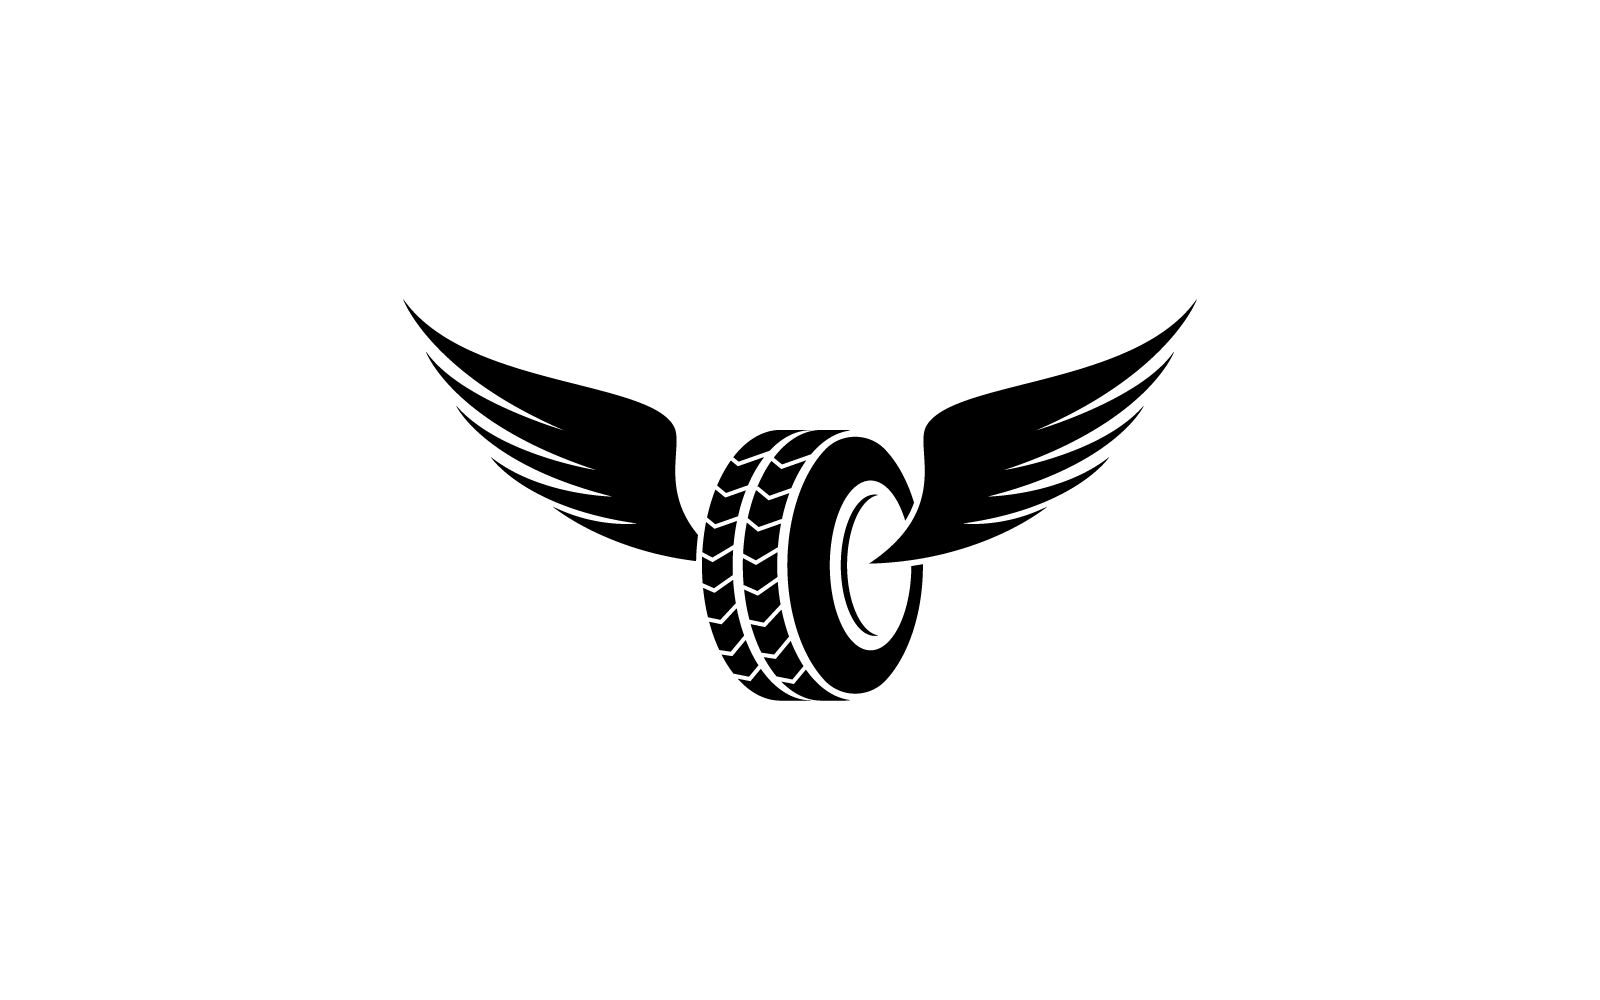 Tires and wing illustration logo vector template